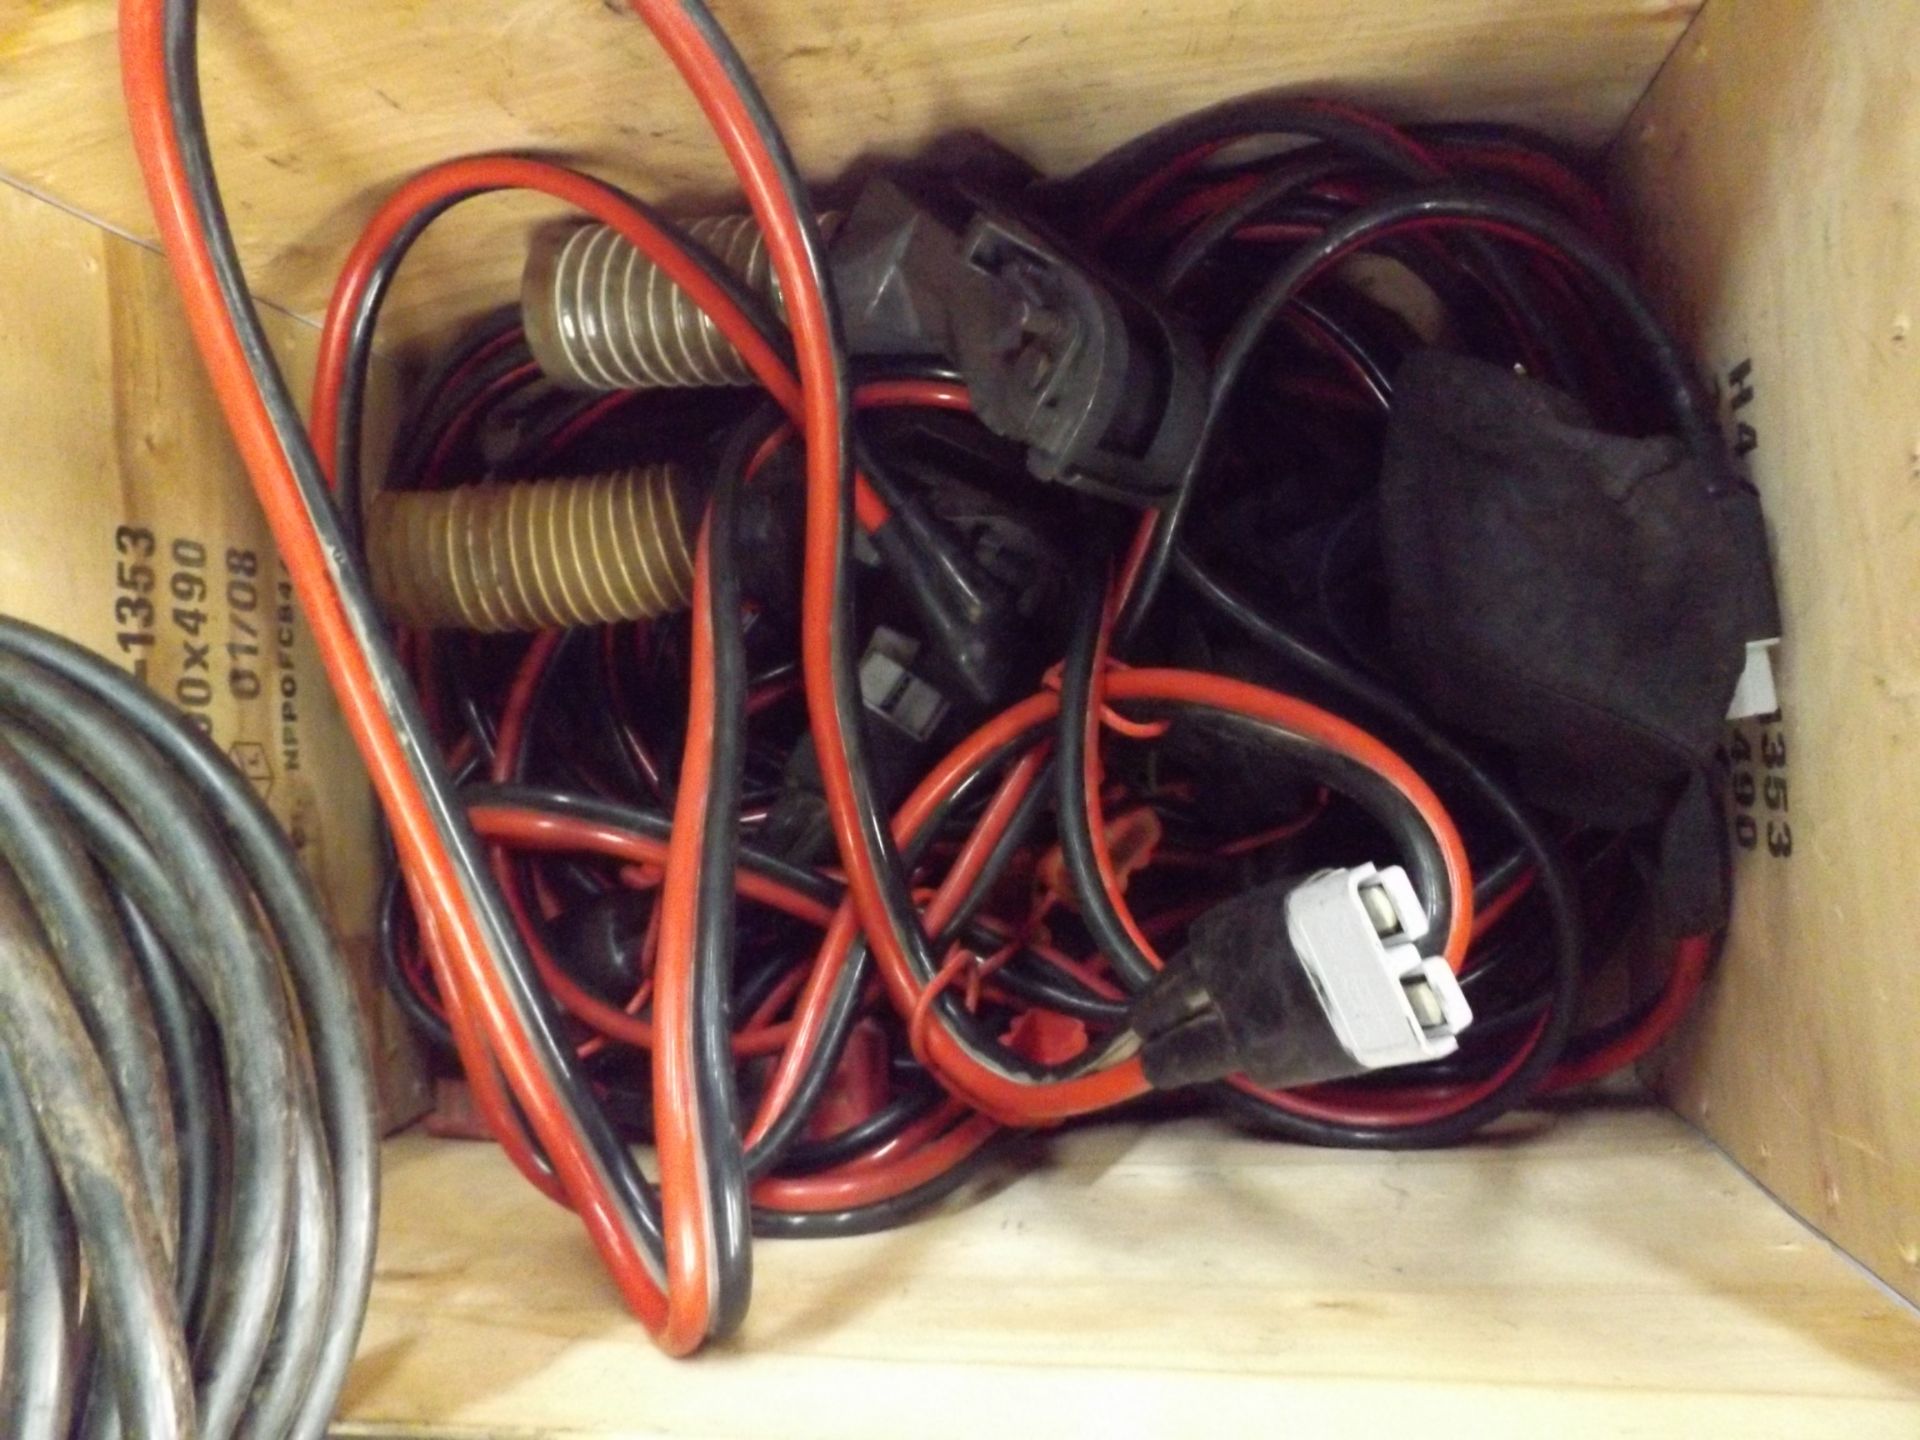 Mixed Stillage of Cables, Exhaust Hose and Airline - Image 2 of 3